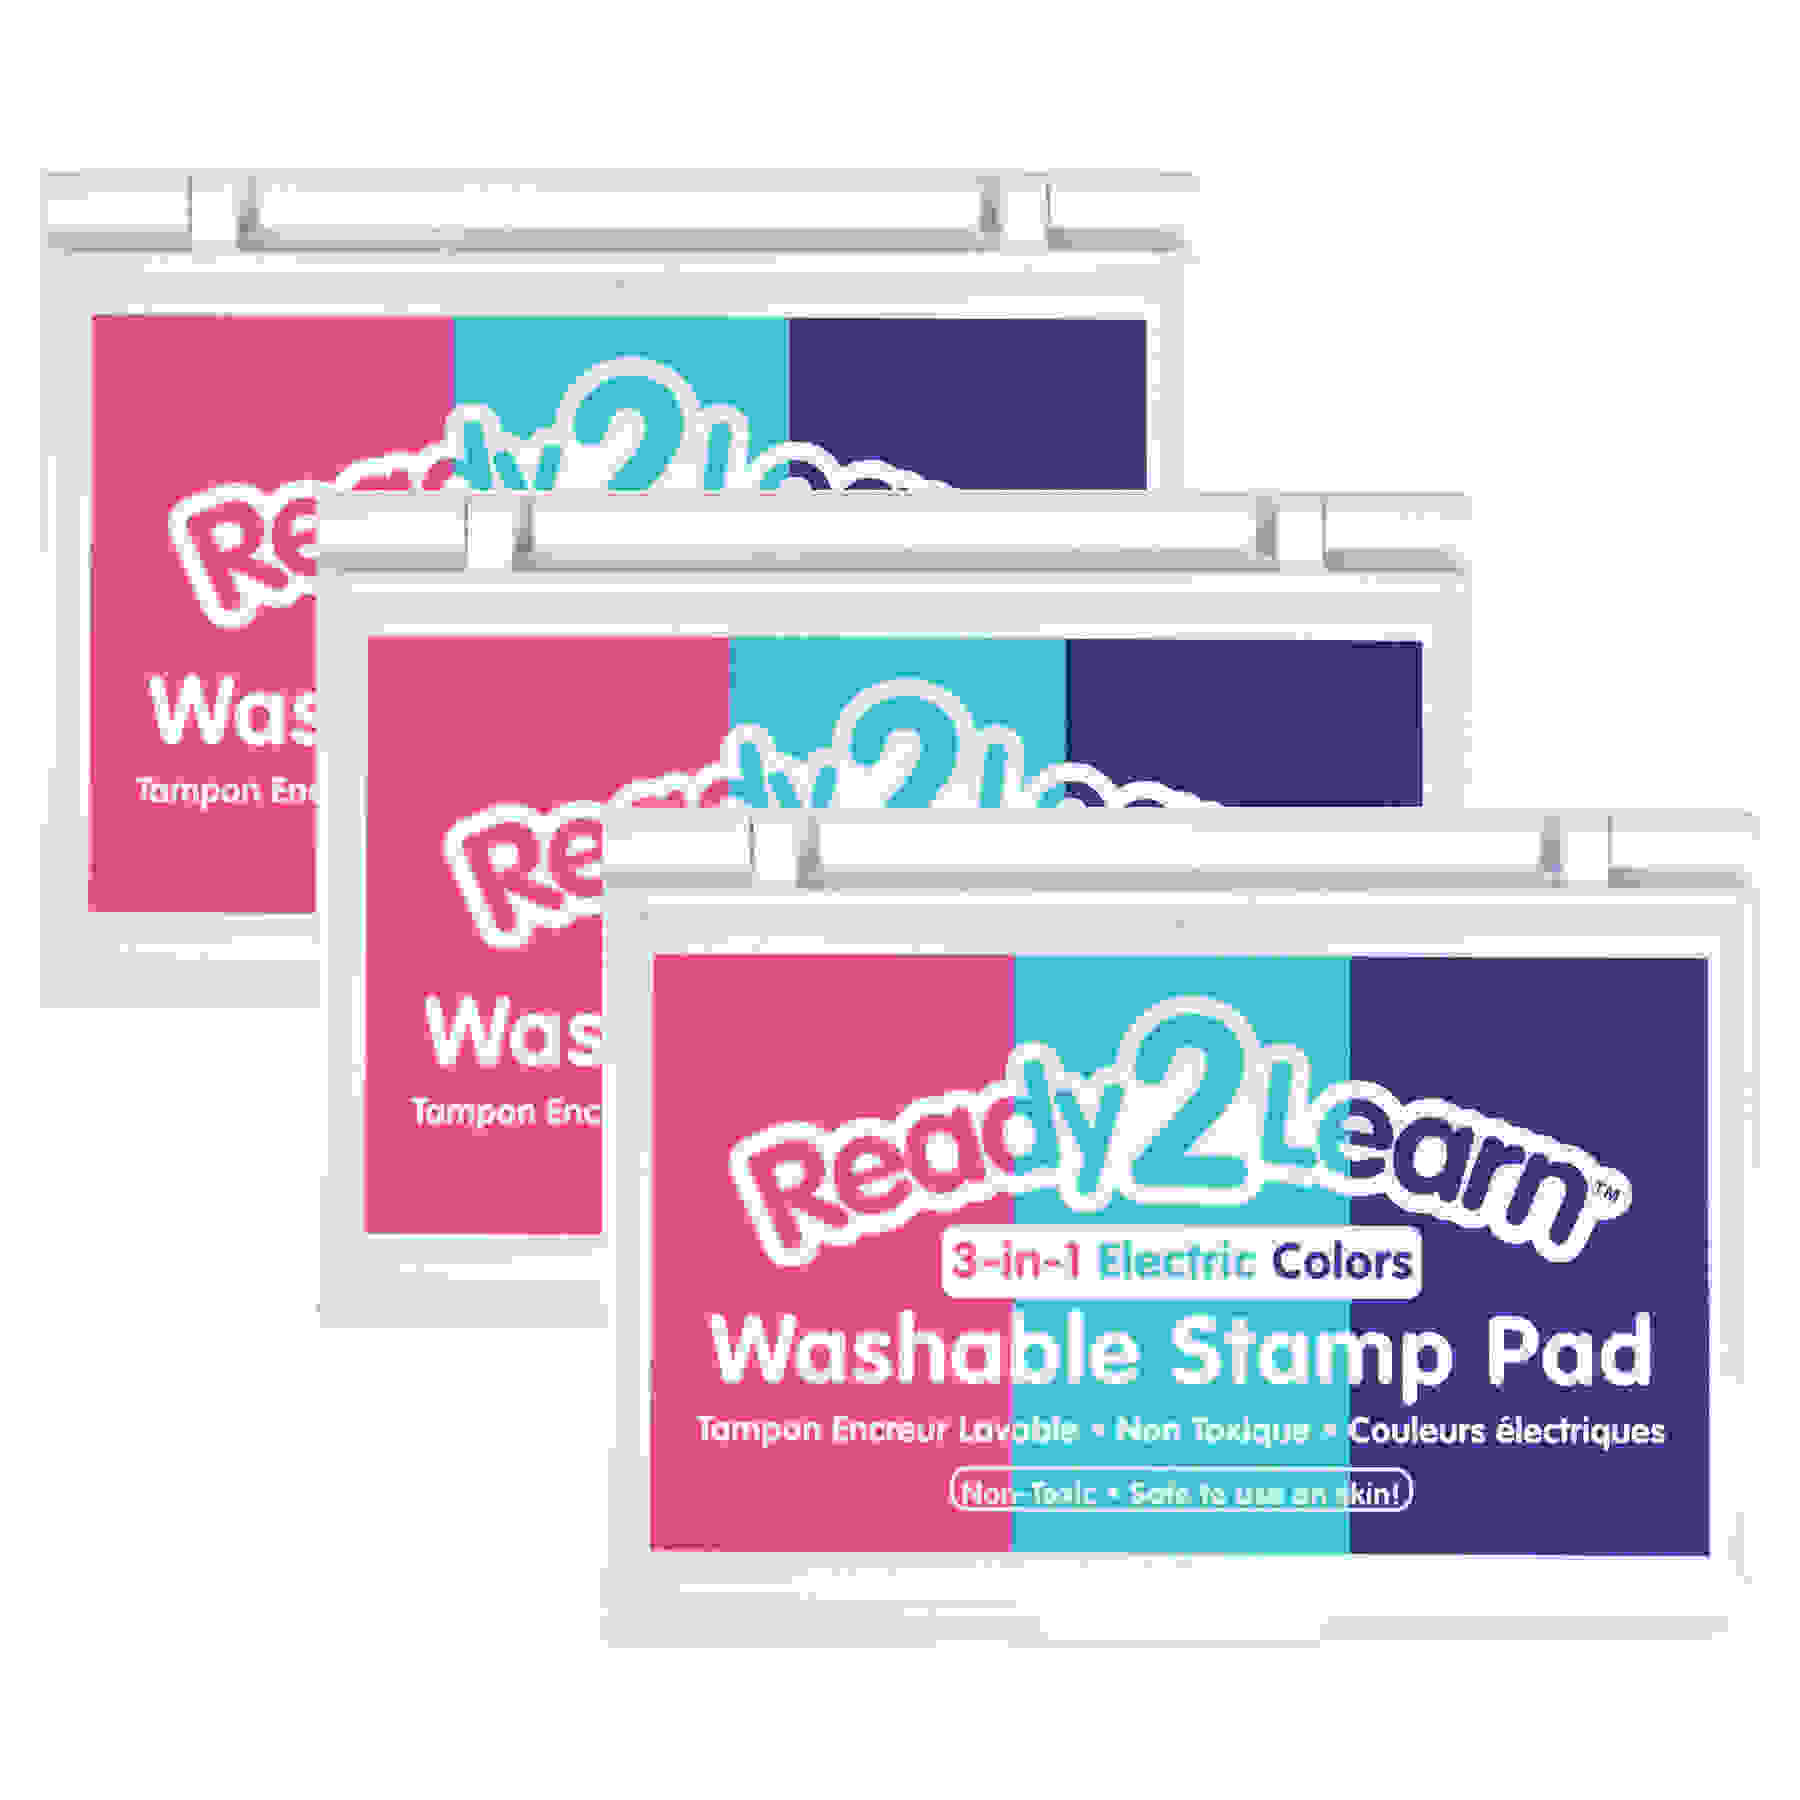 Washable Stamp Pad - 3-in-1 Electric Colors - Pack of 3